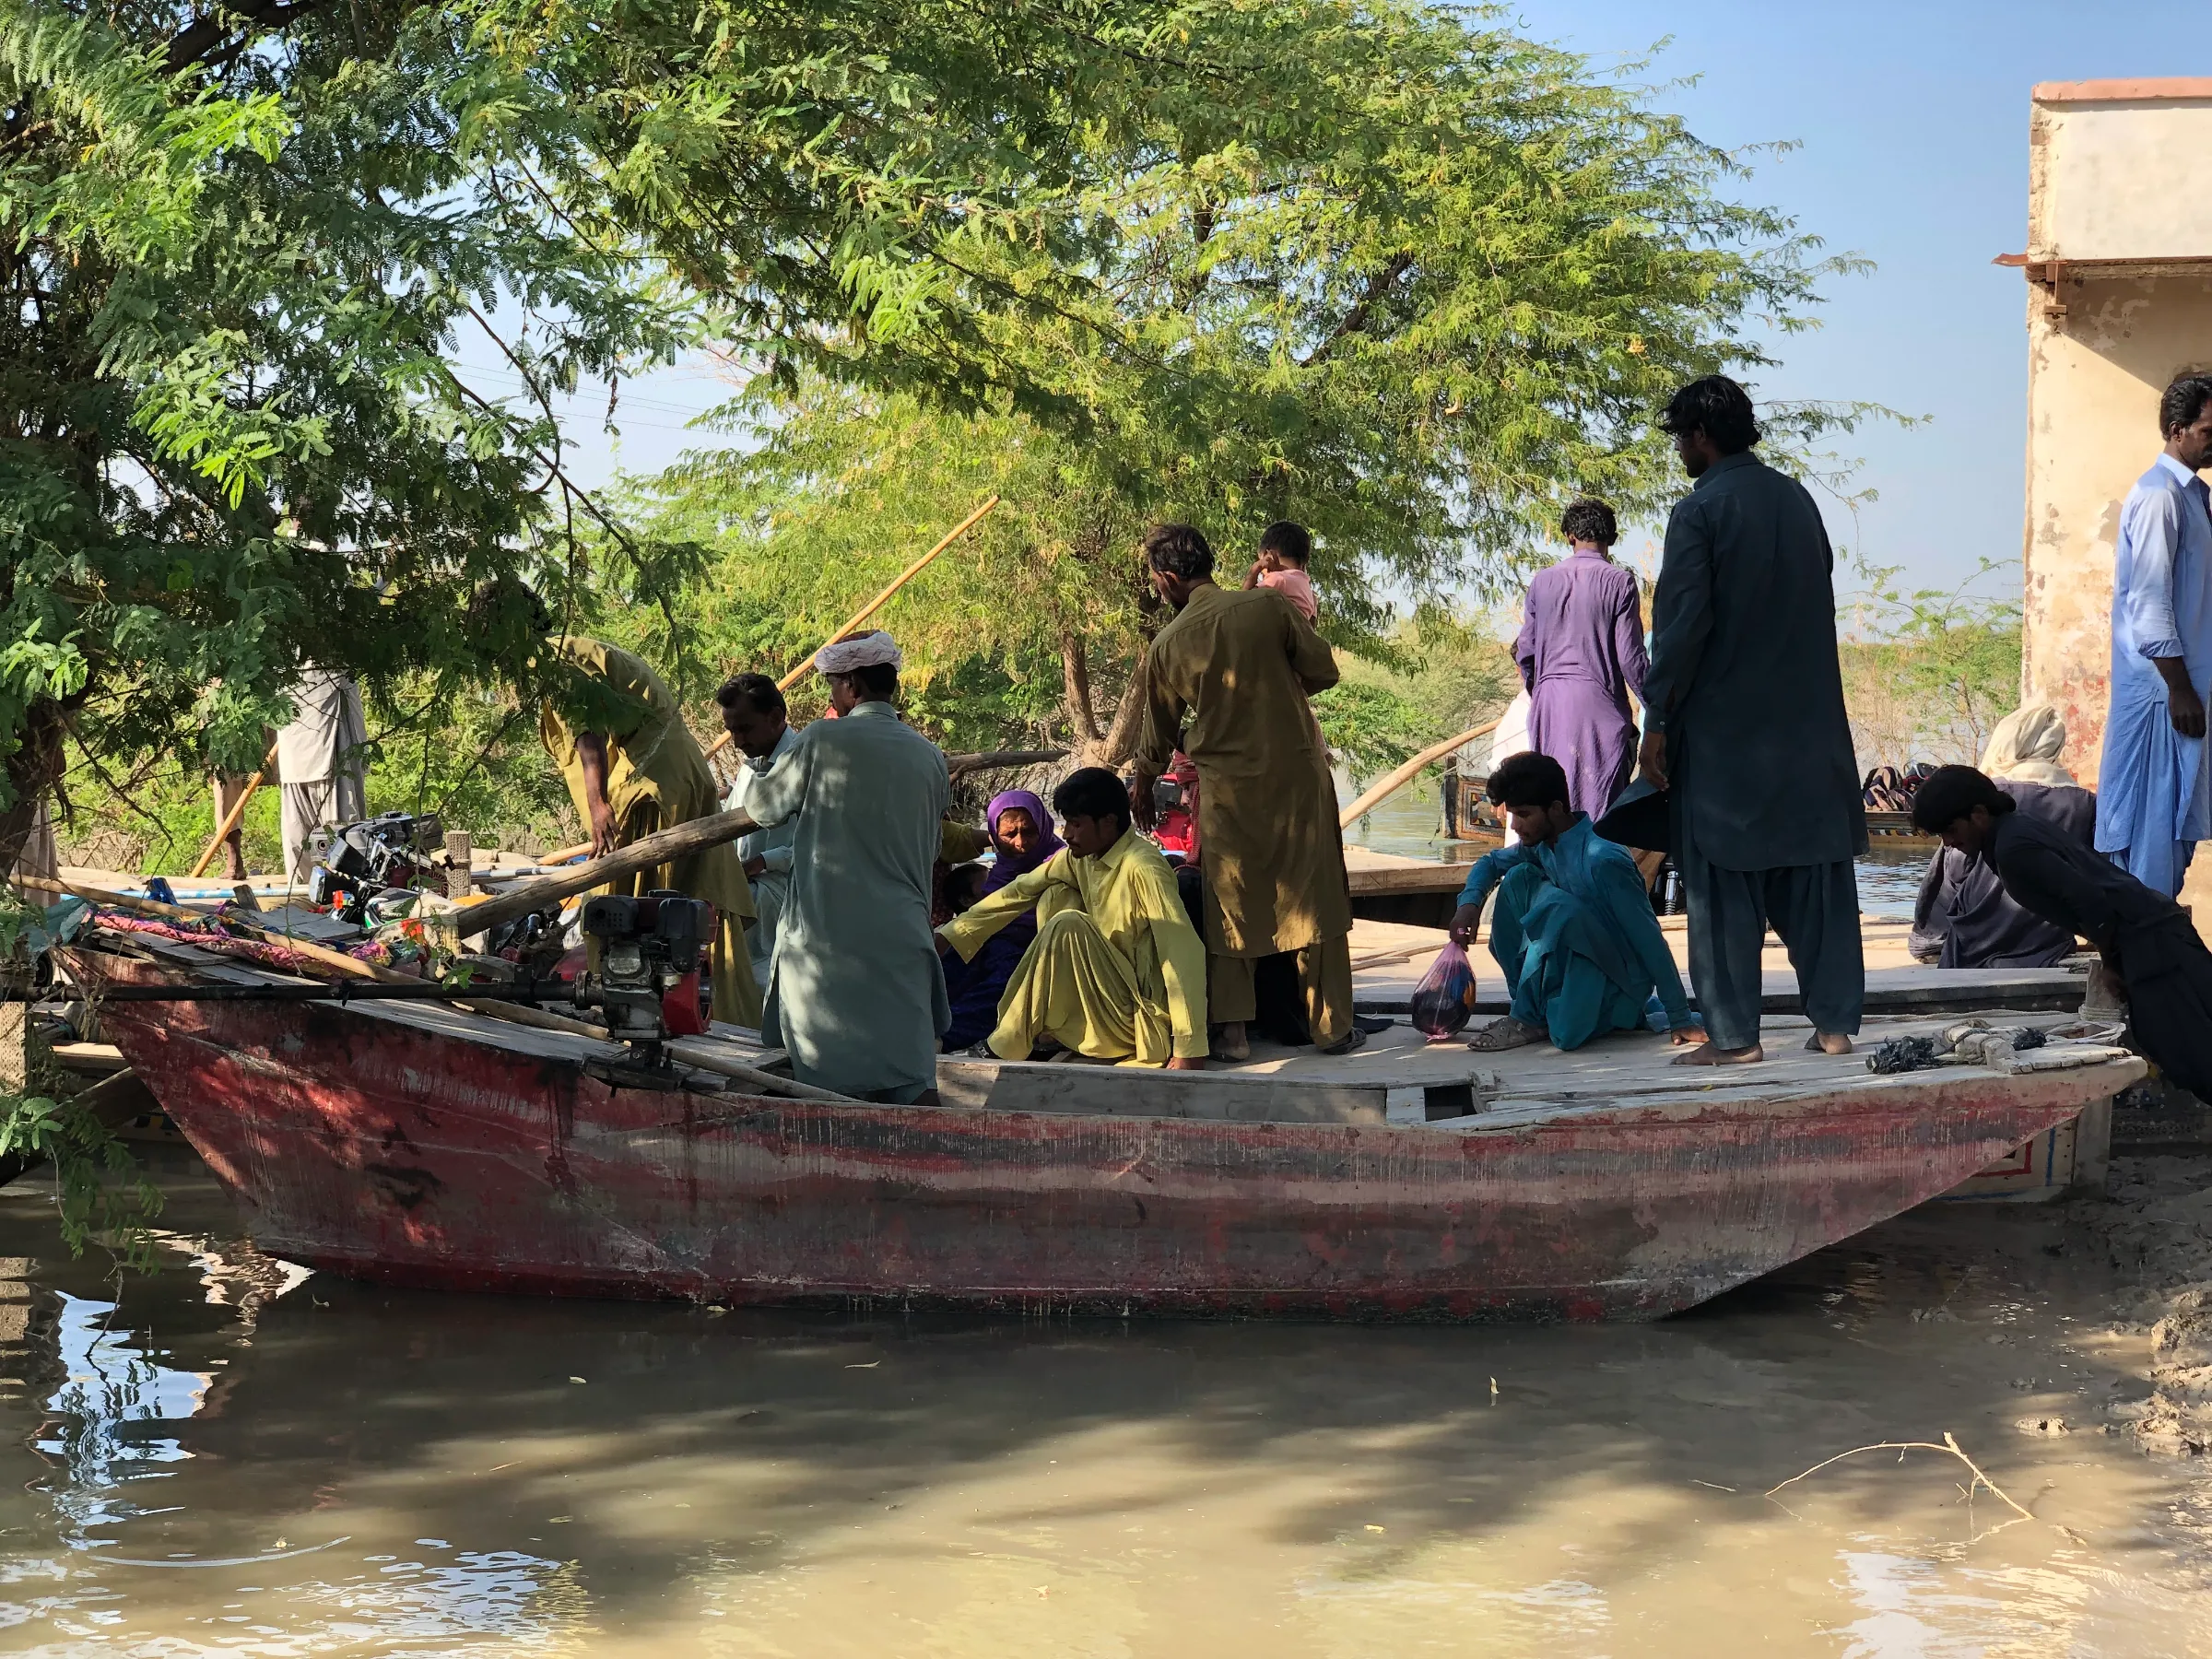 The main road at Chandhan Mori, a marketplace that often gets inundated during flooding and has developed big potholes, making navigation difficult, in Sindh province, Pakistan, October 14, 2022. Thomson Reuters Foundation/Zofeen Ebrahim